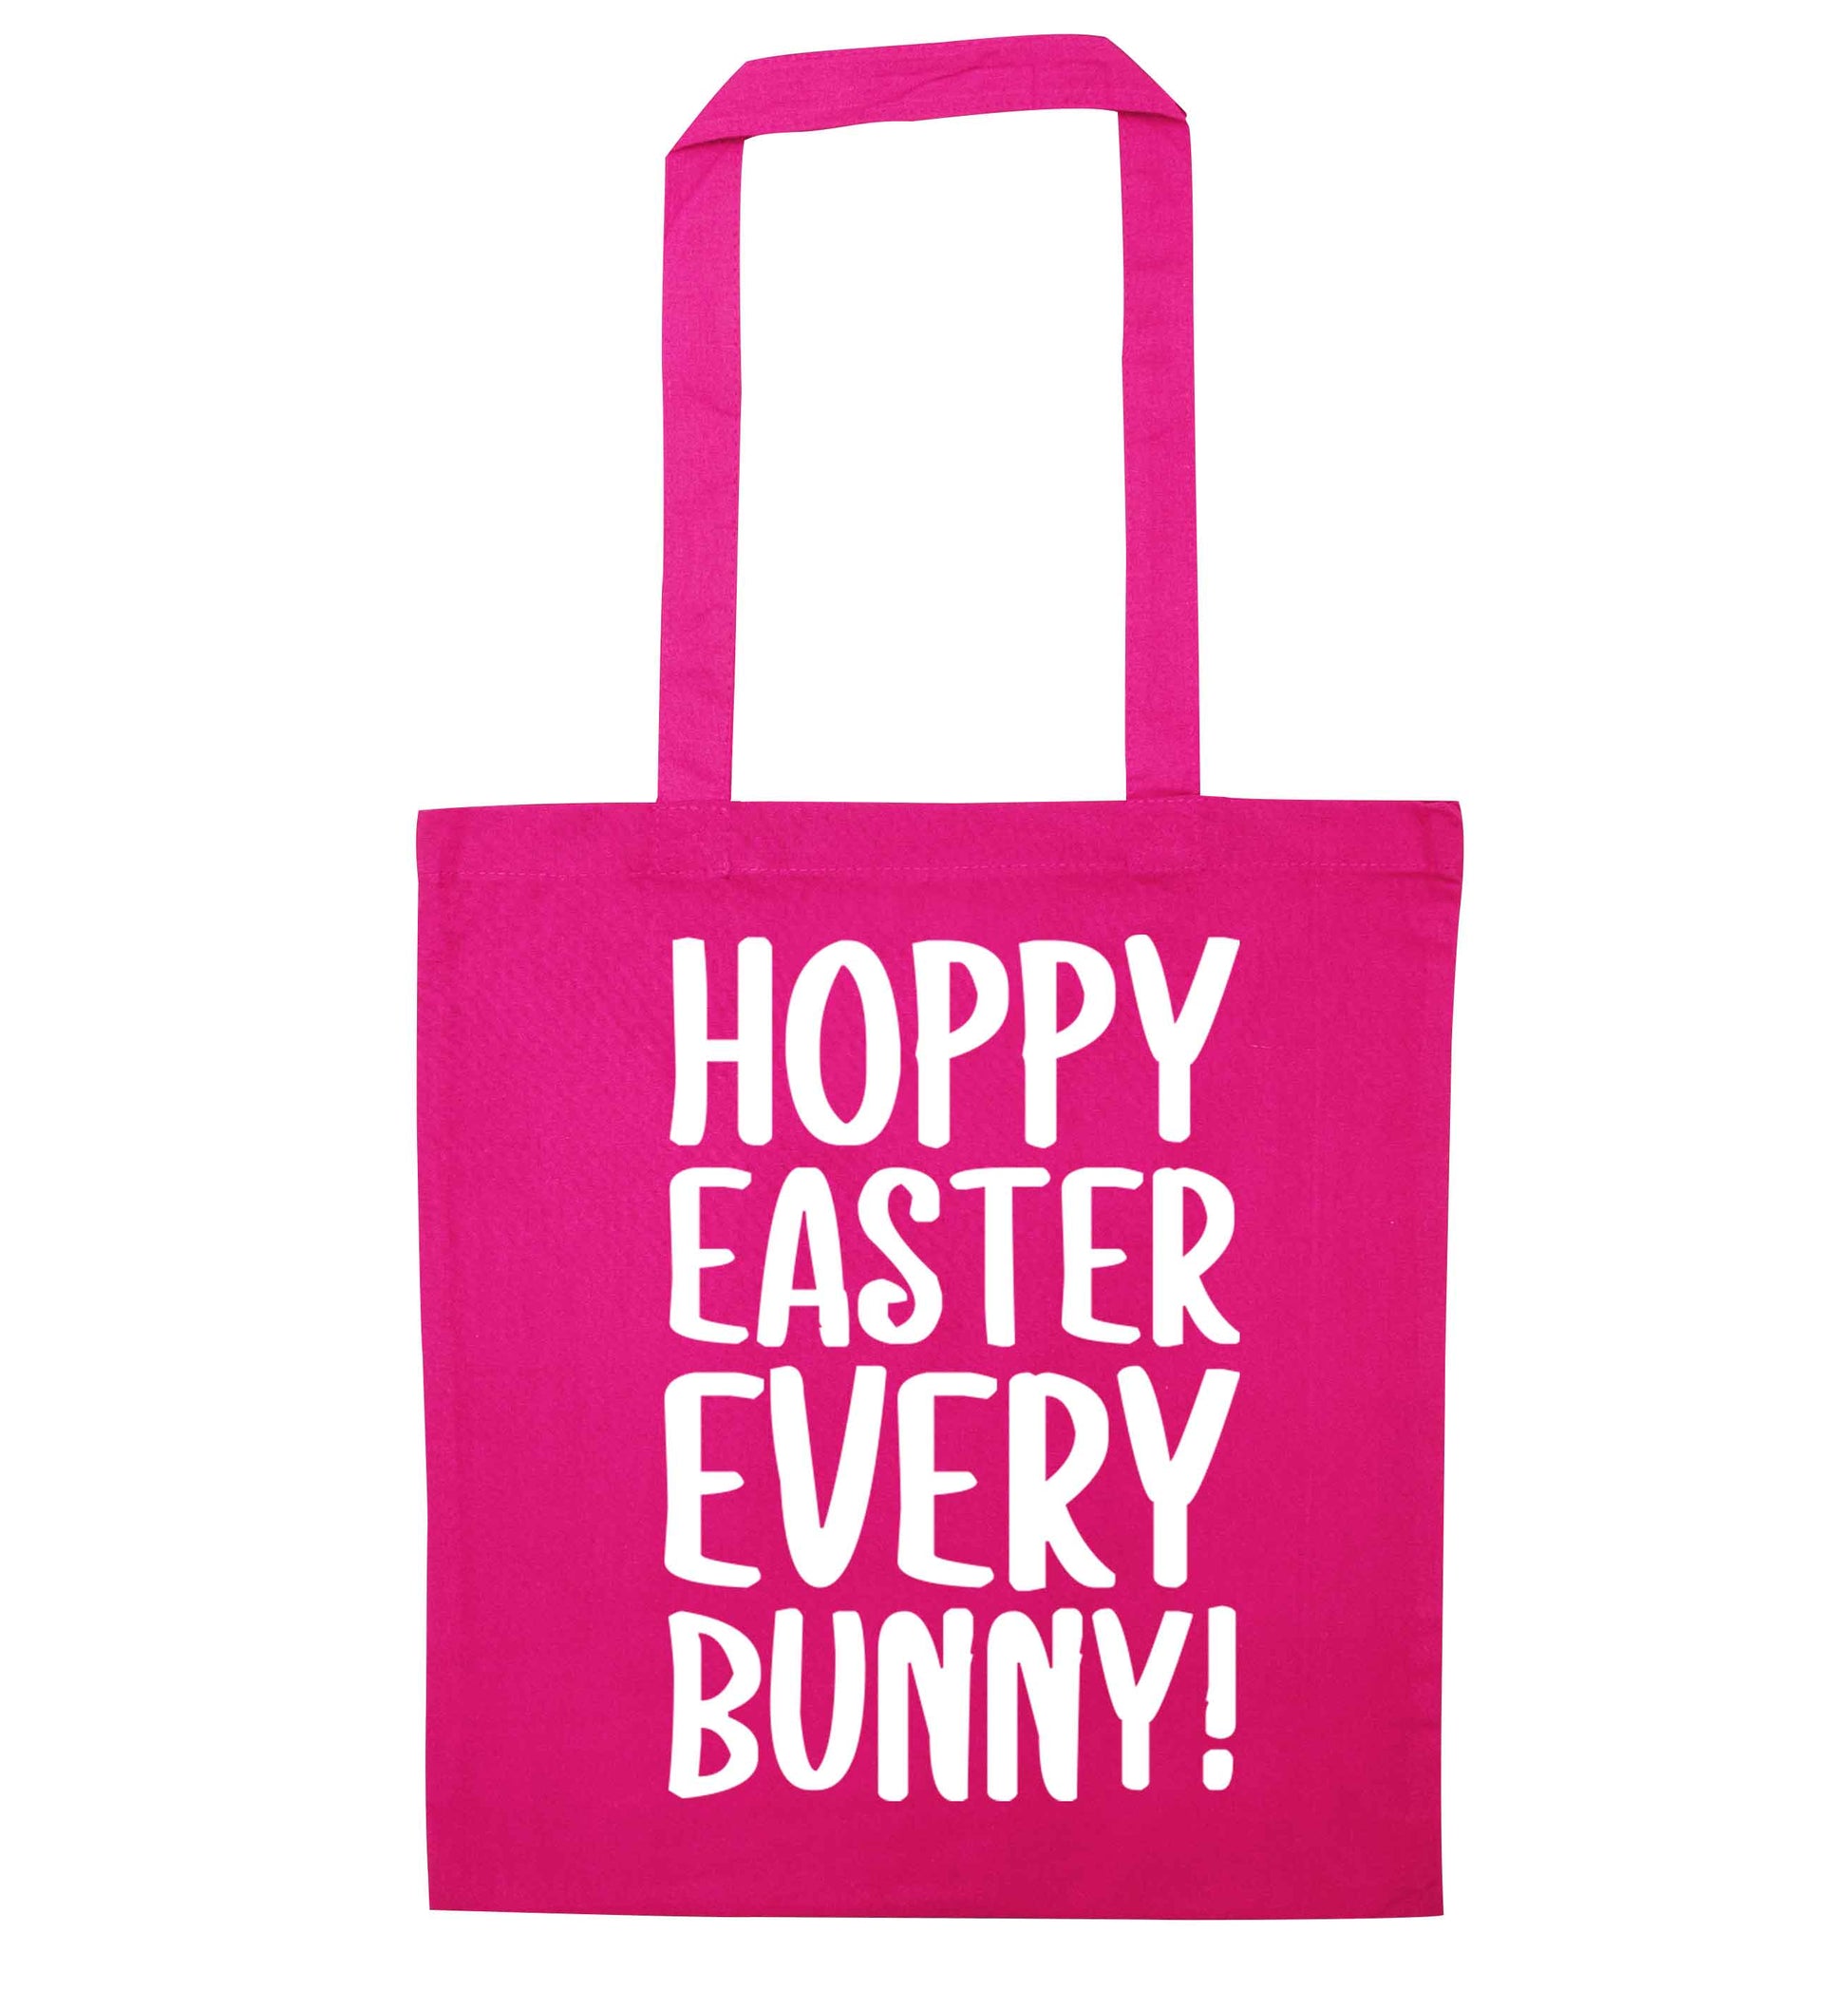 Hoppy Easter every bunny! pink tote bag